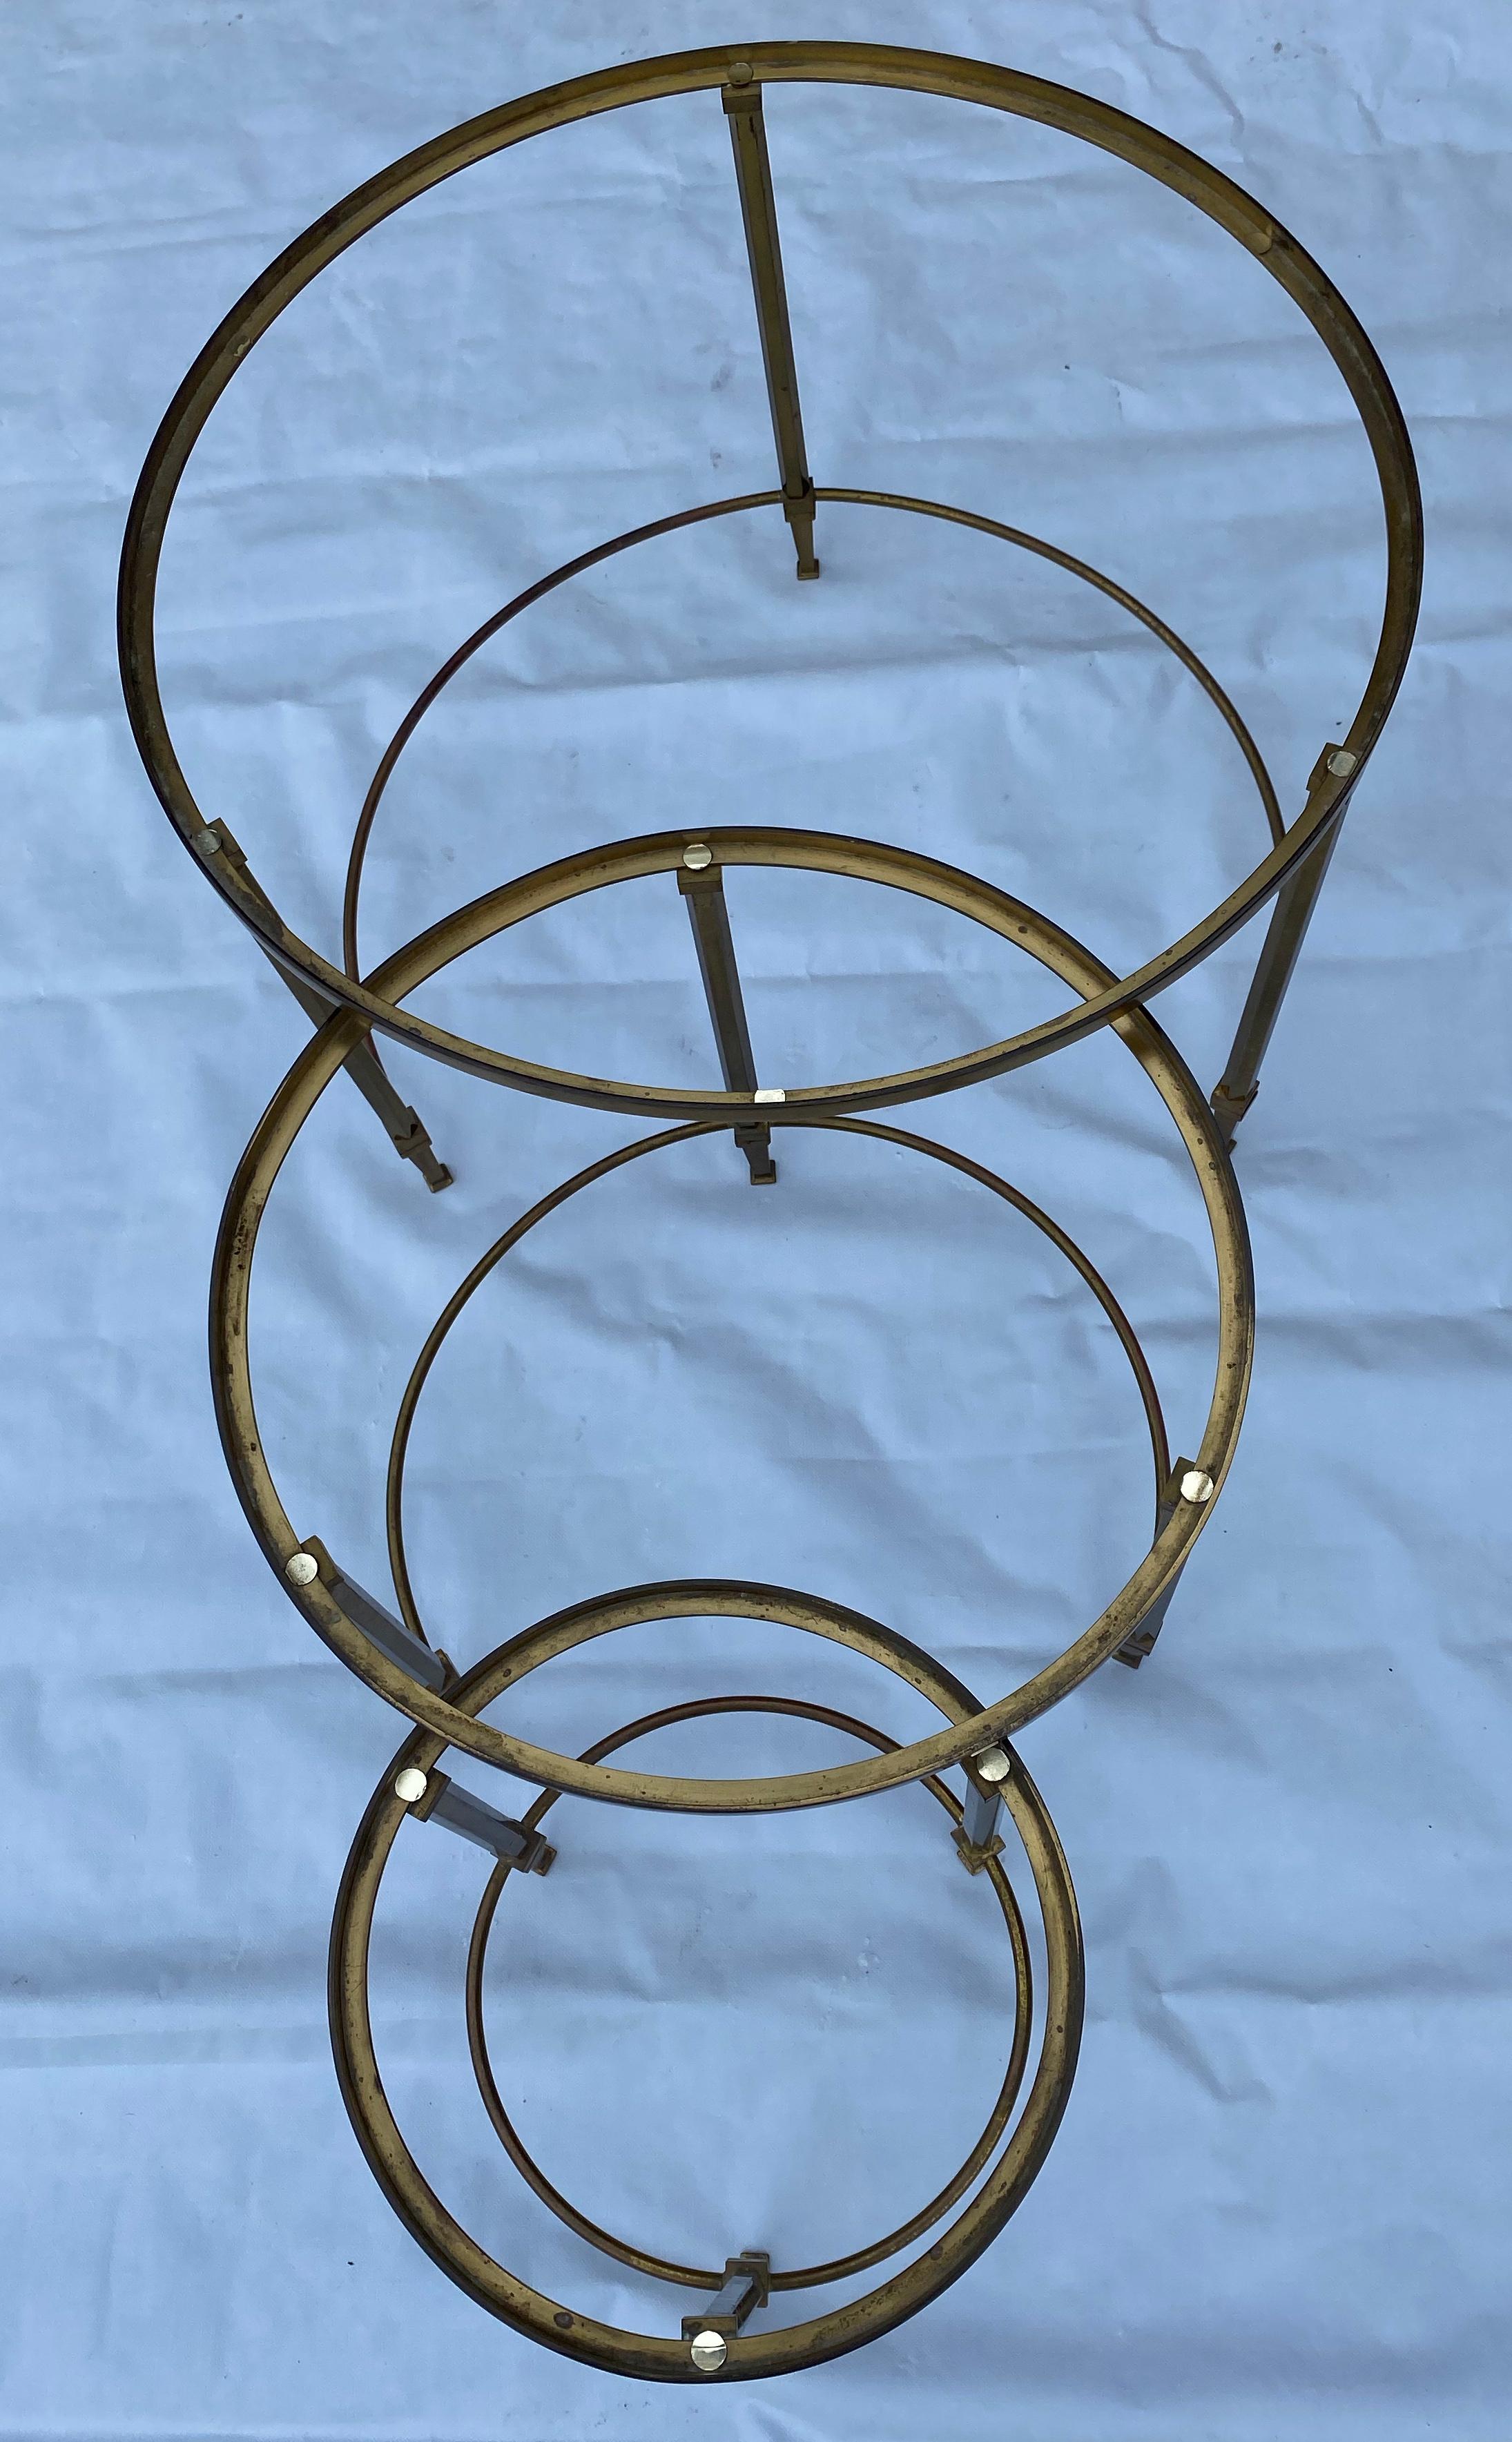 Series of nesting round tables
Measures: diameter 59 X height 40 cm
diameter 43 X height 37 cm
diameter 29 X height 35 cm
brass, hexagonal section uprights
Good condition circa 1950/70
Measures: height : 40 cm
Depth : 59 cm
Tops in smoked